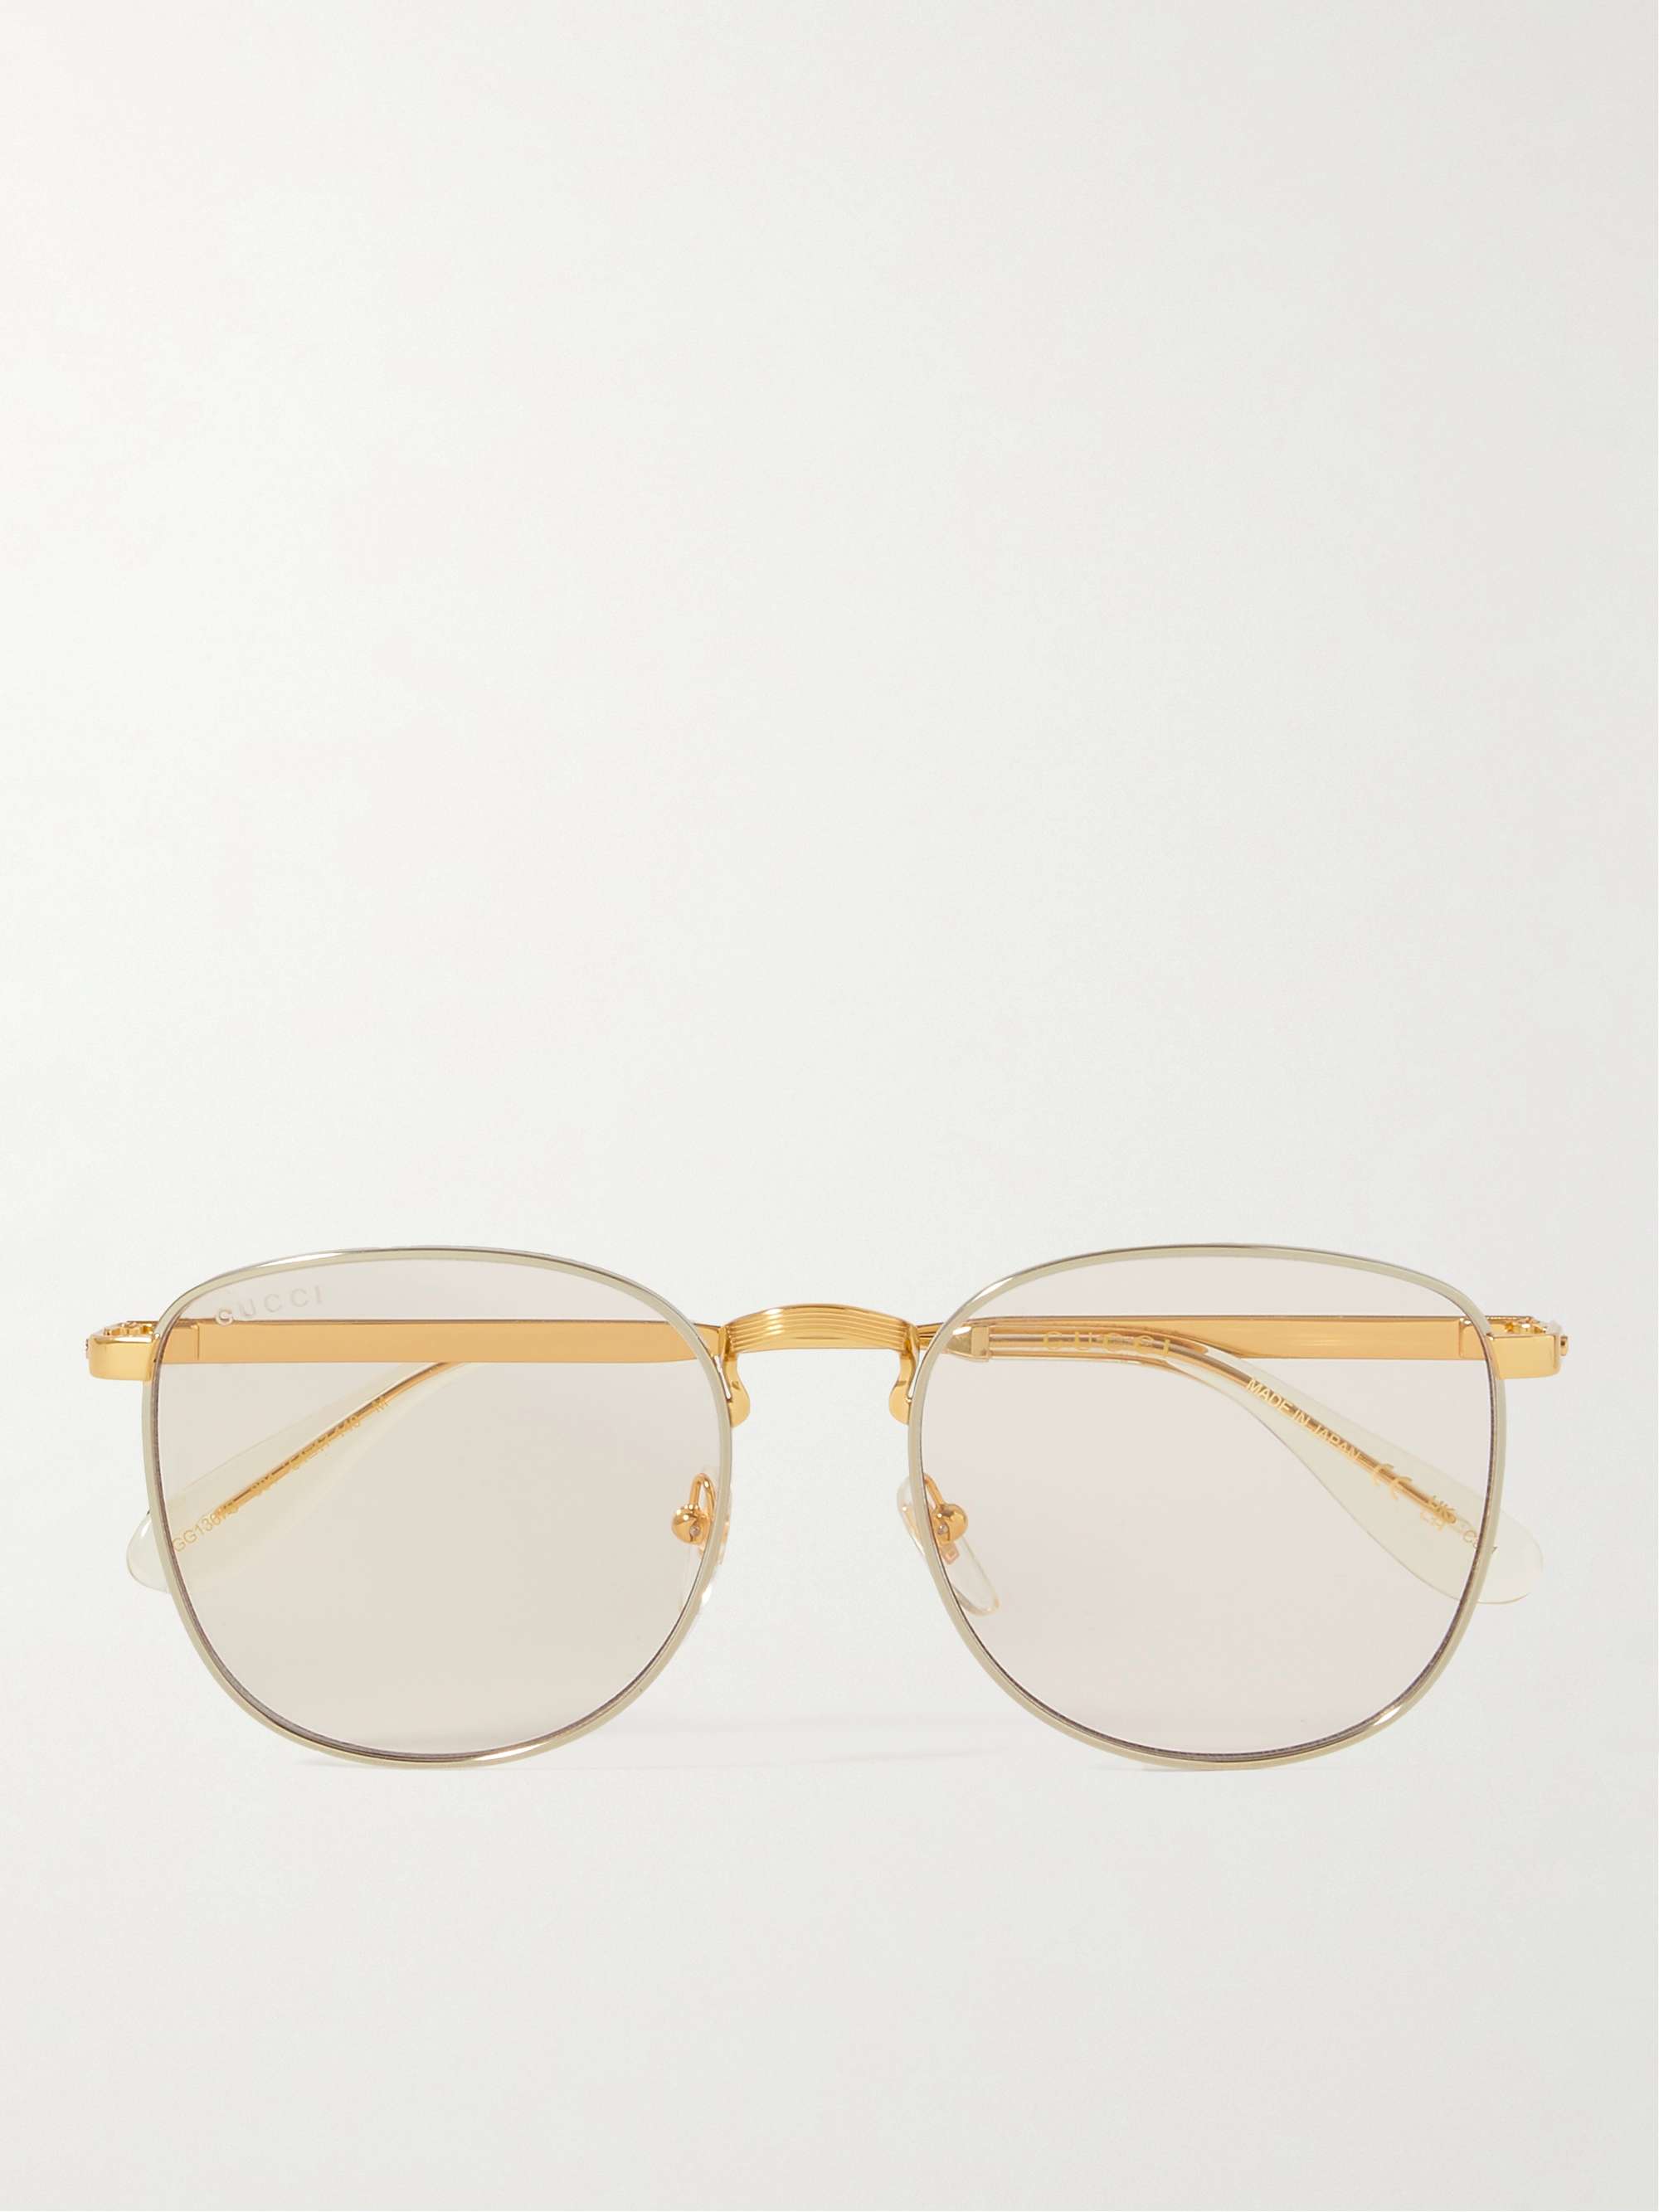 GUCCI EYEWEAR Round-Frame Silver and Gold-Tone Sunglasses